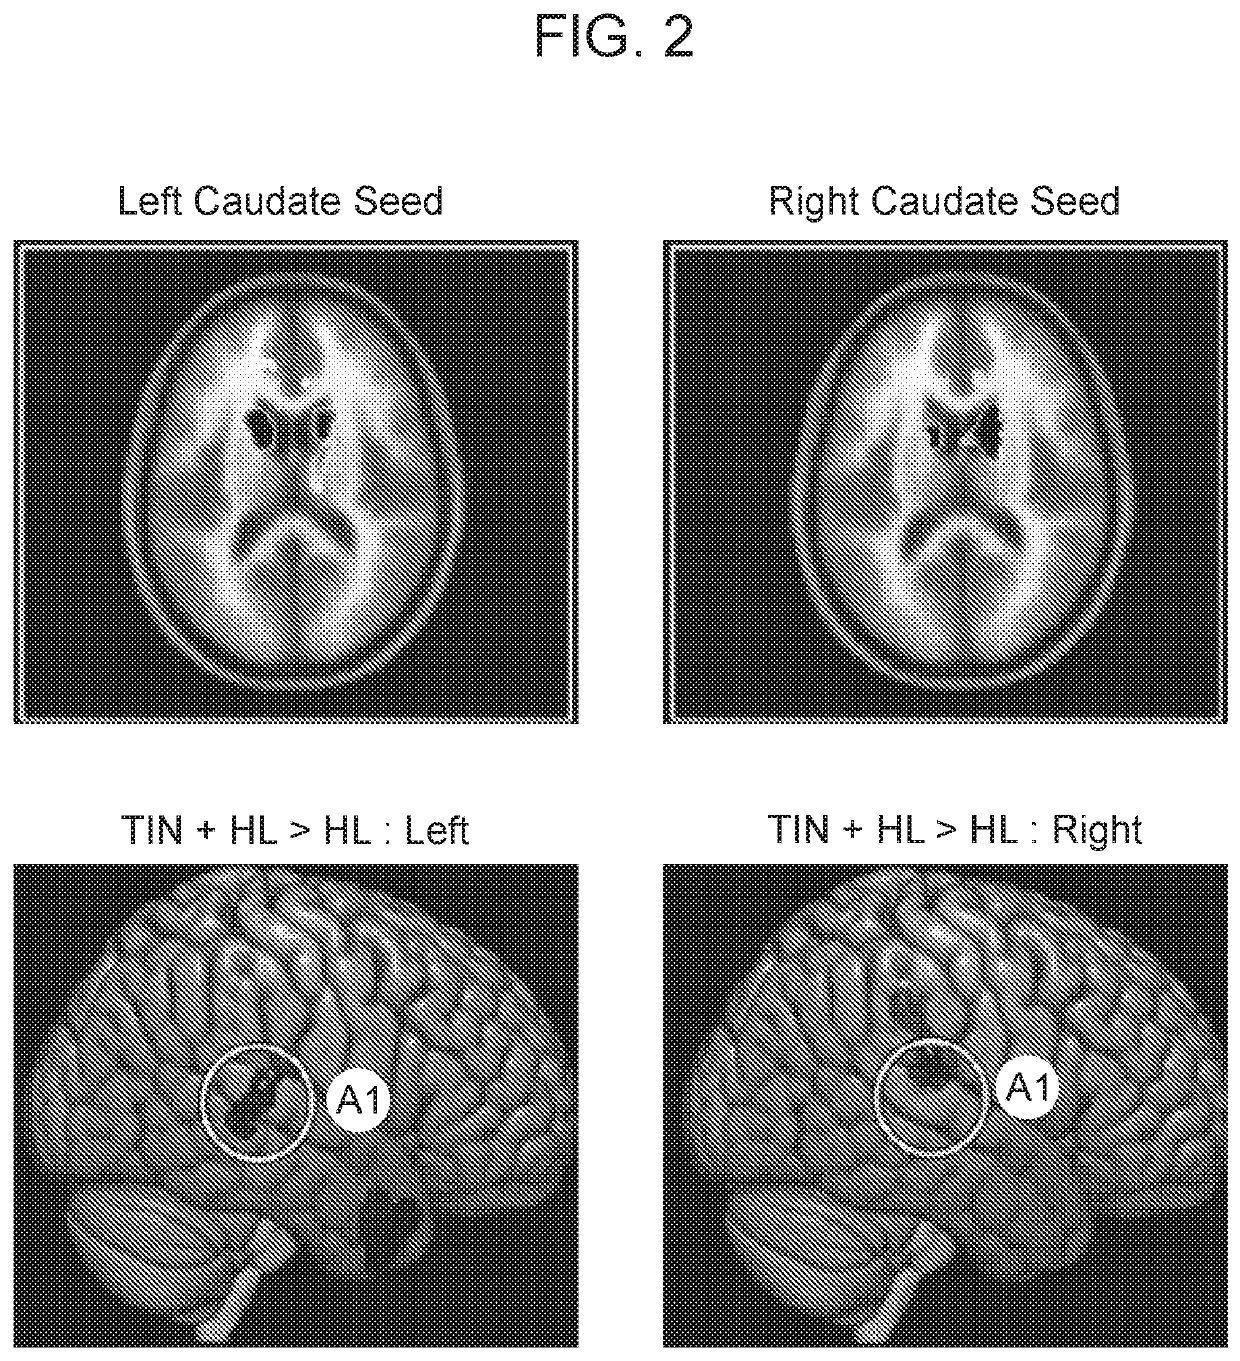 Multimodal Neuroimaging-Based Diagnostic Systems and Methods for Detecting Tinnitus